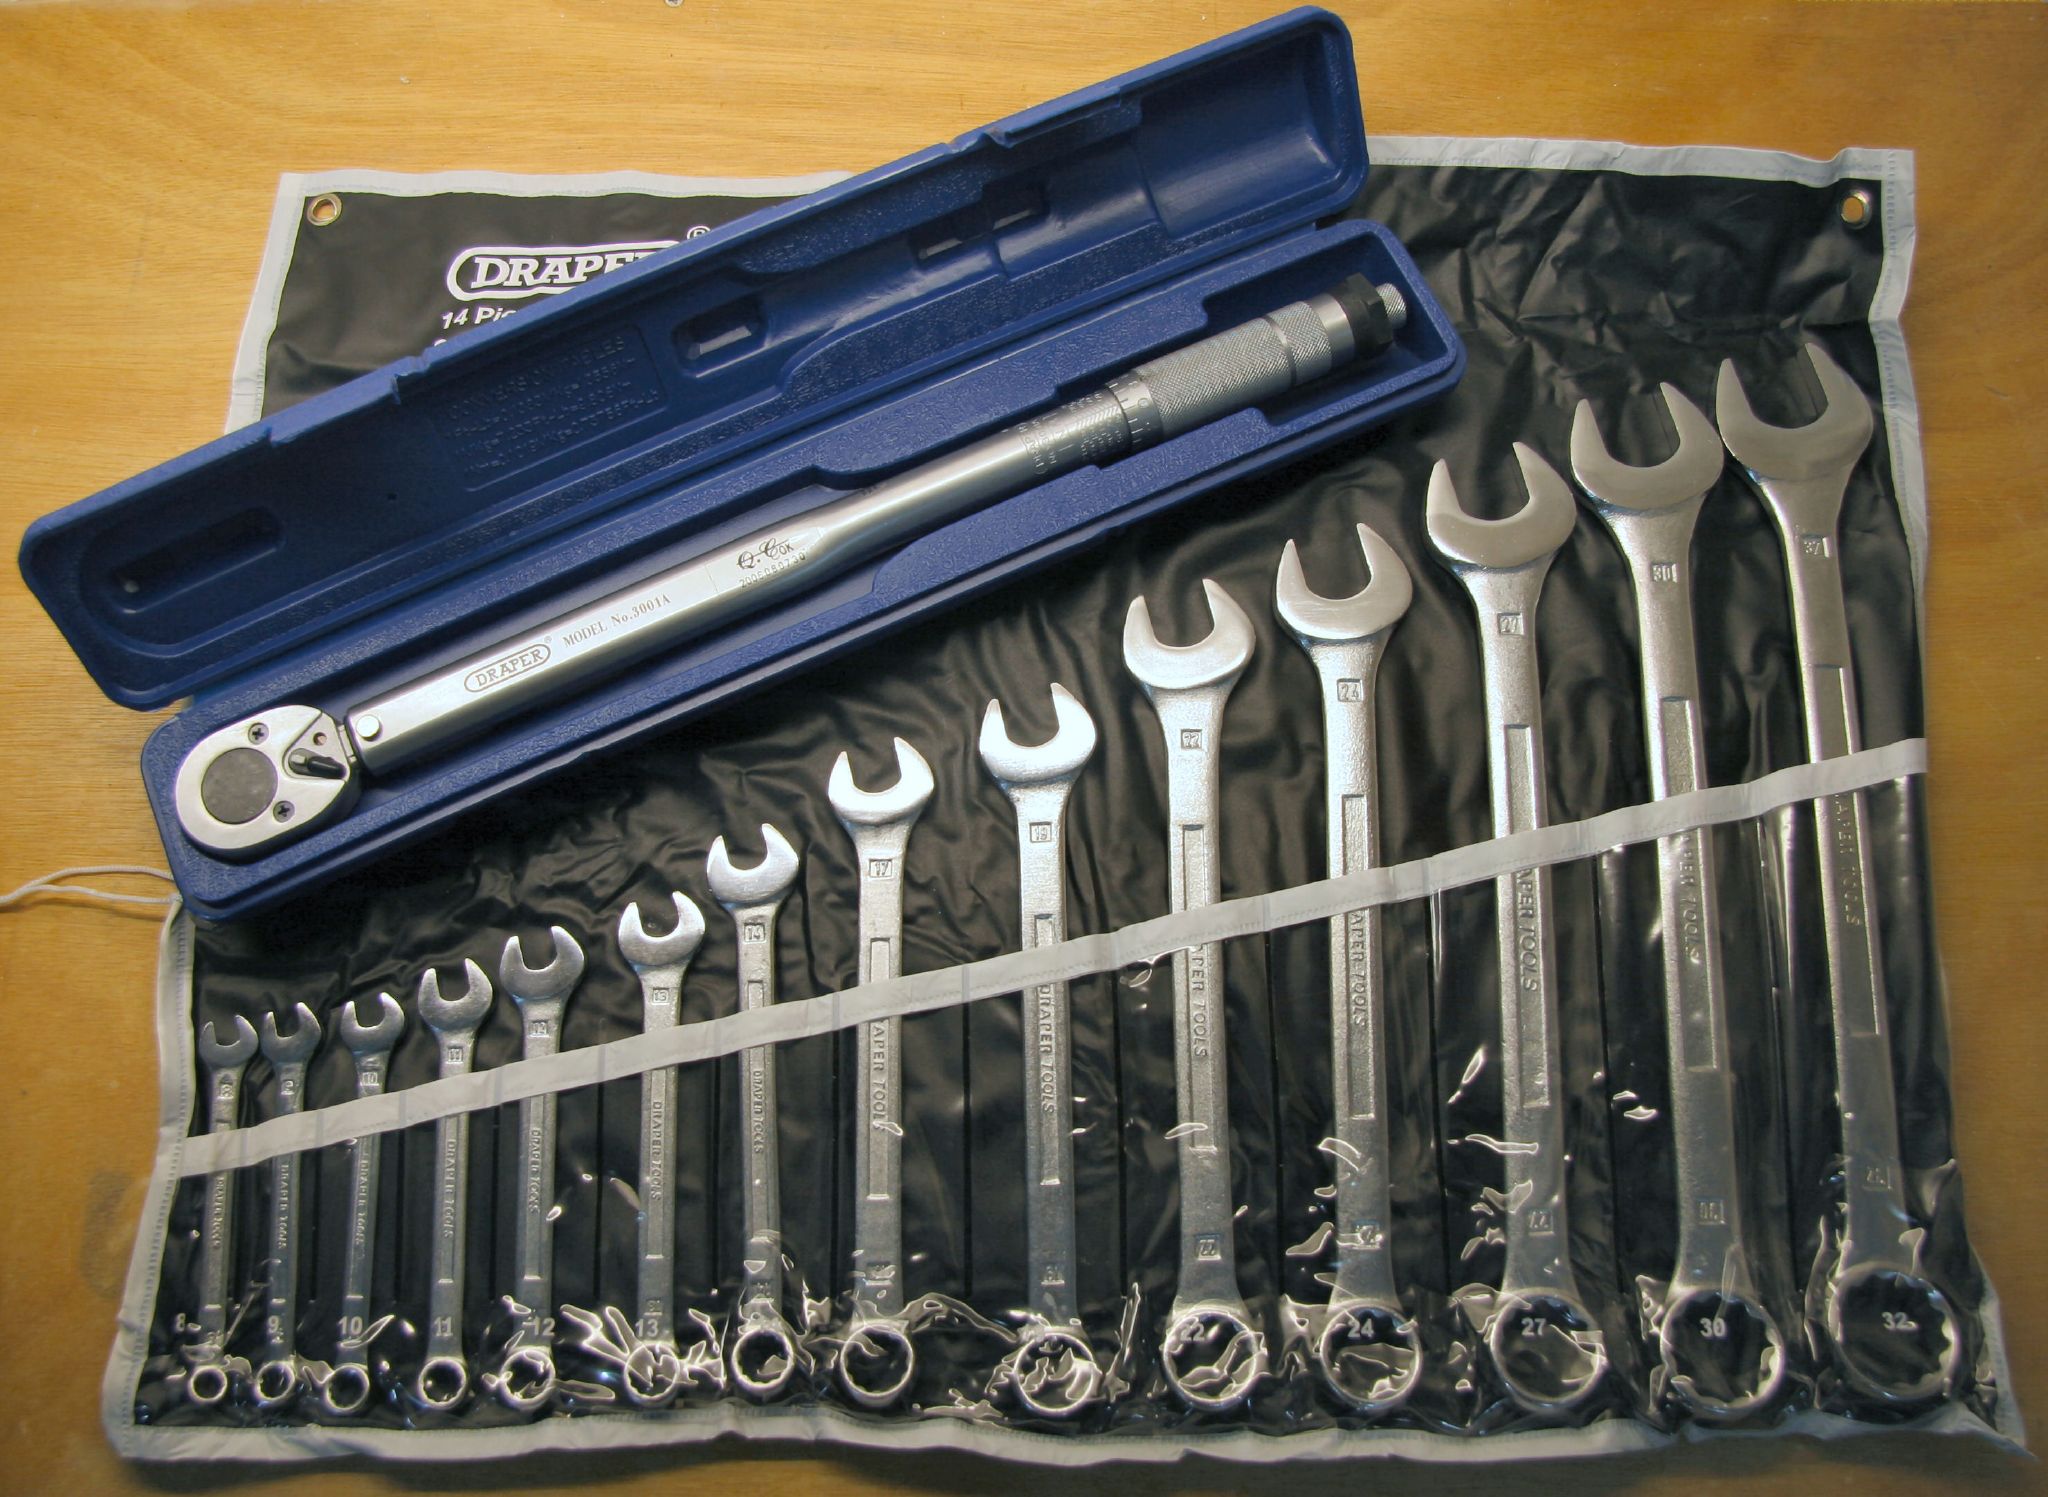 there is a tool box with many different wrenches